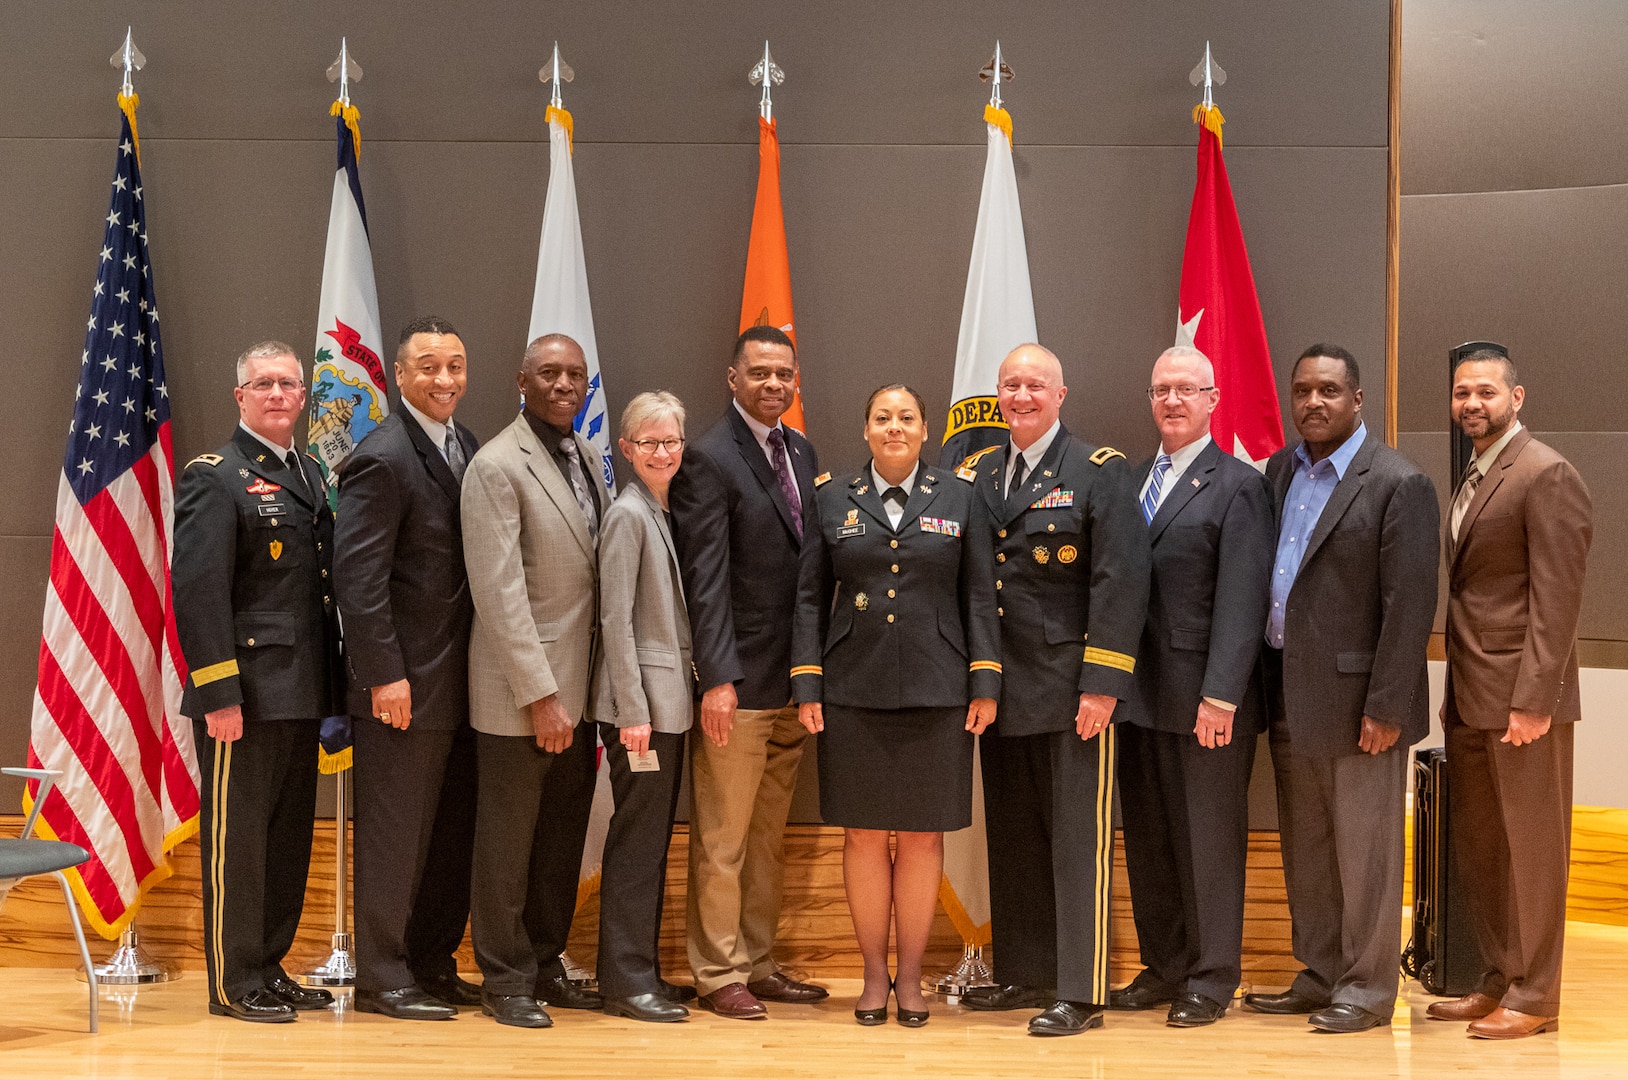 Col. Kim McGhee, center, poses for a photo with family, friends and colleagues following her promotion to O-6 May 20, 2019, at the Army National Guard Readiness Center in Arlington, Virginia. McGhee is the first African-American female to be promoted to the rank of colonel in the West Virginia Army National Guard. (Courtesy photo)